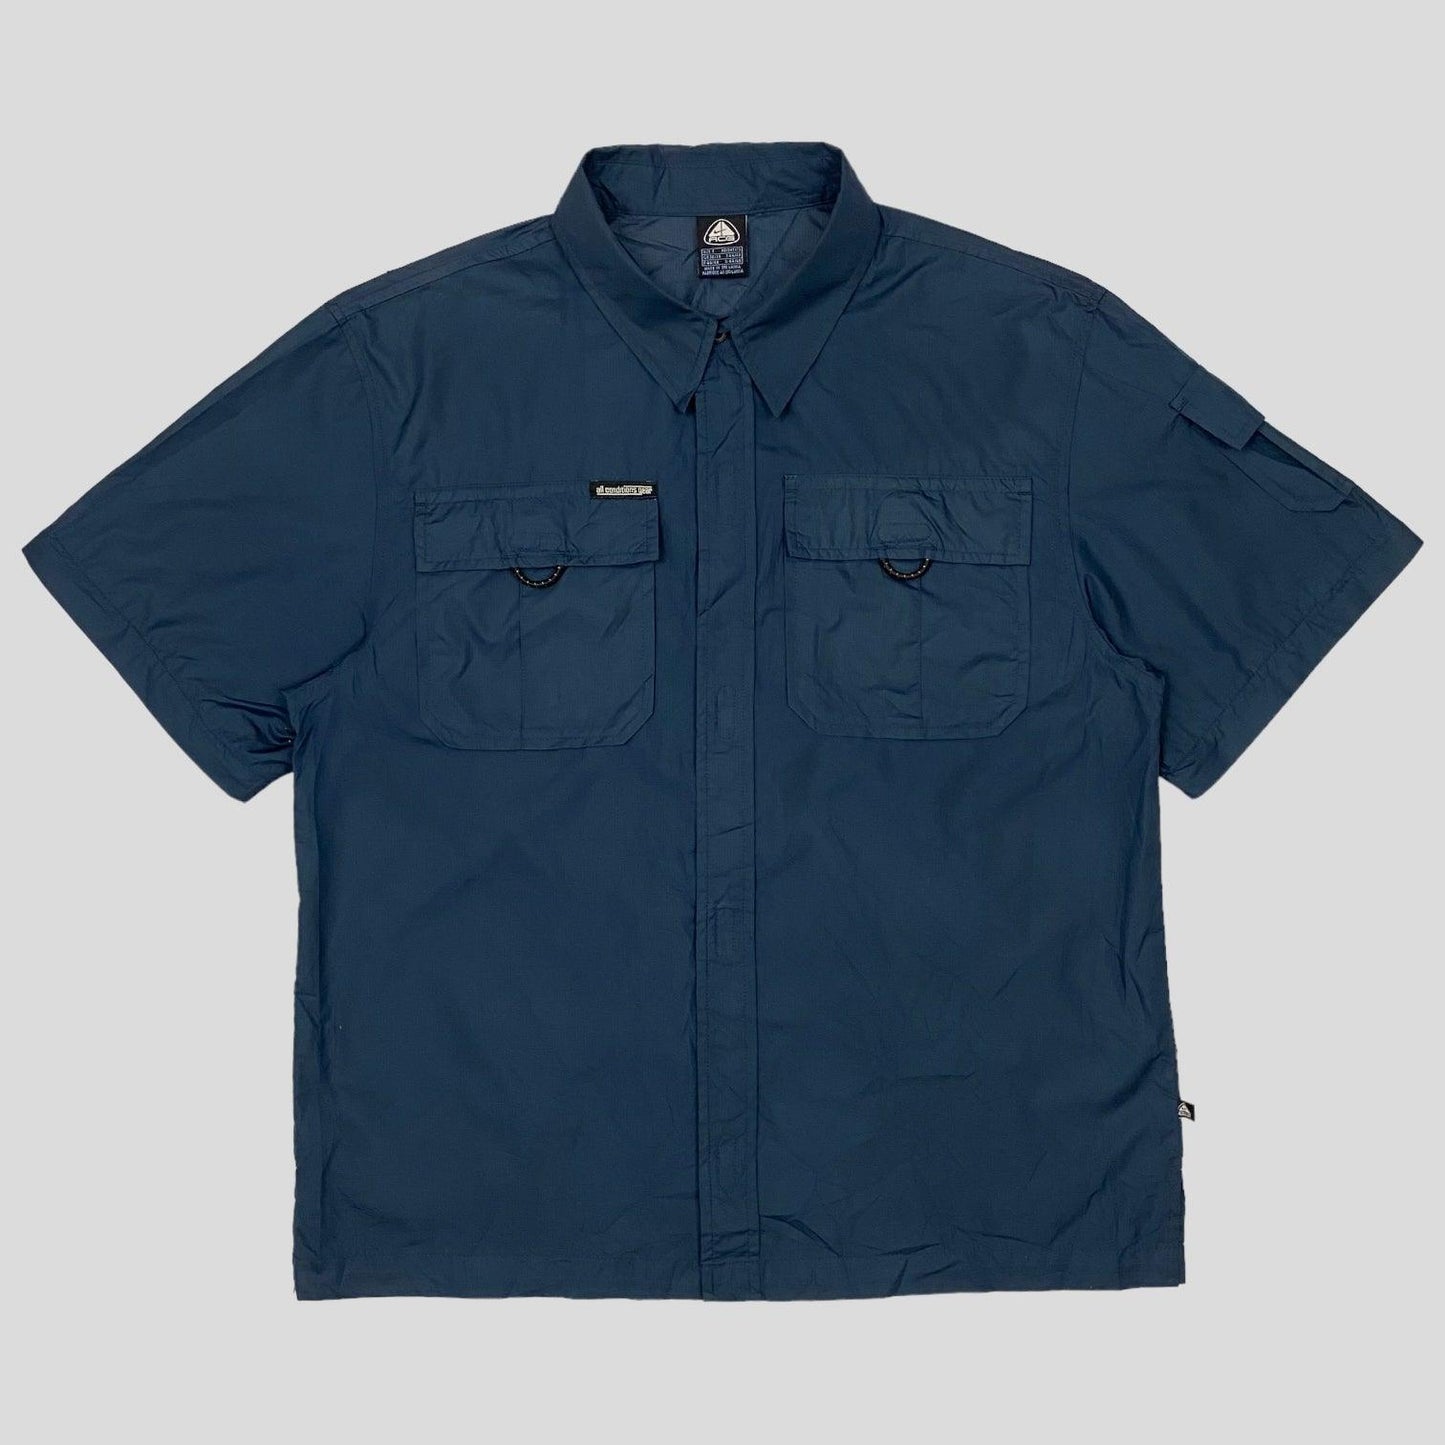 Nike ACG SS01 Technical Ripstop 2 in 1 Shirt - M - Known Source